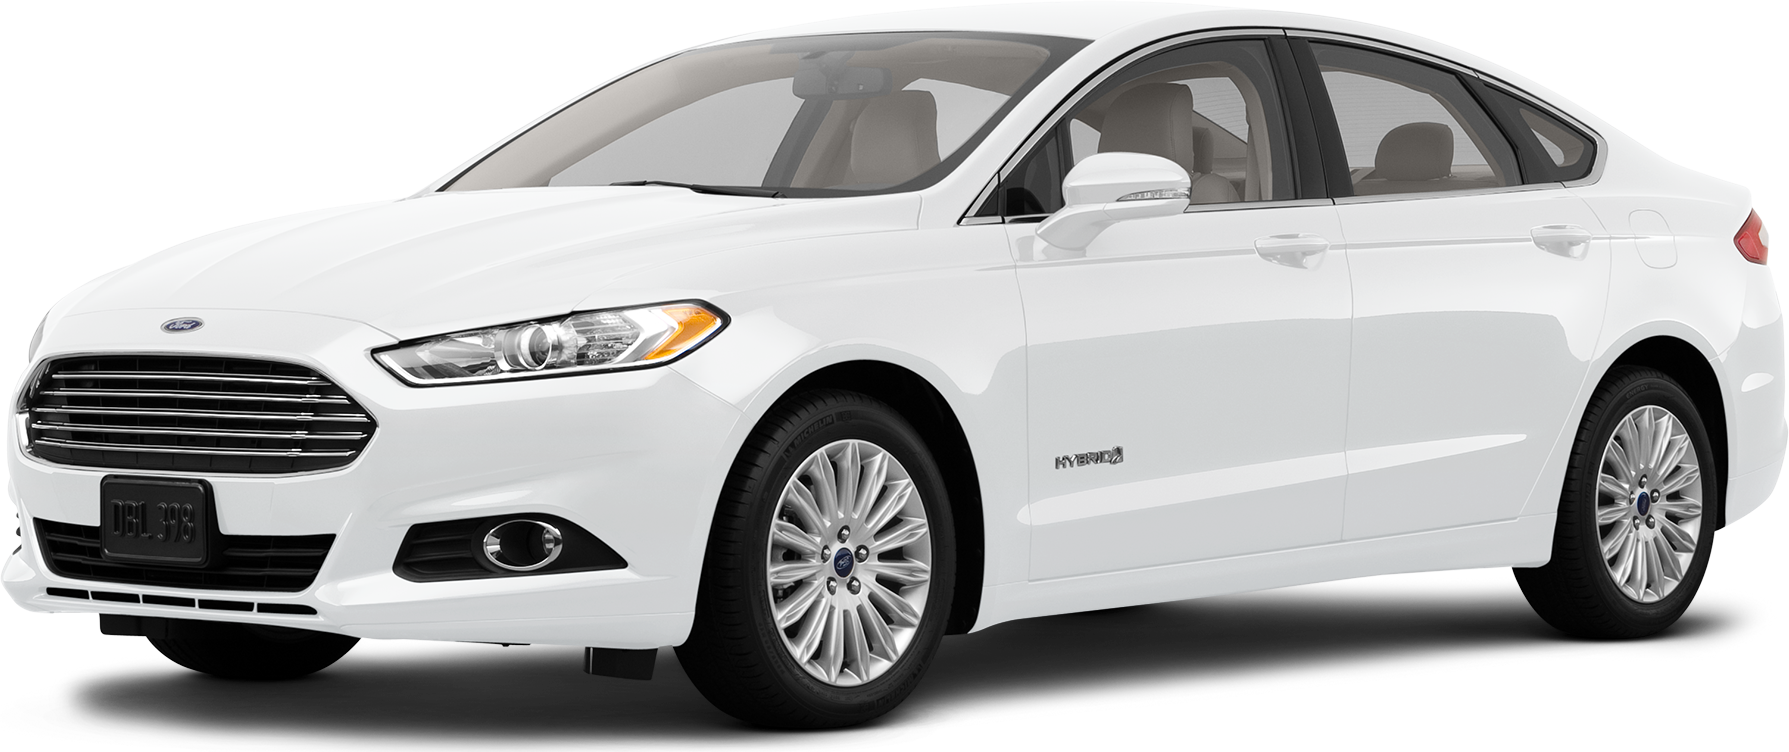 2013 Ford Fusion Specs and Features